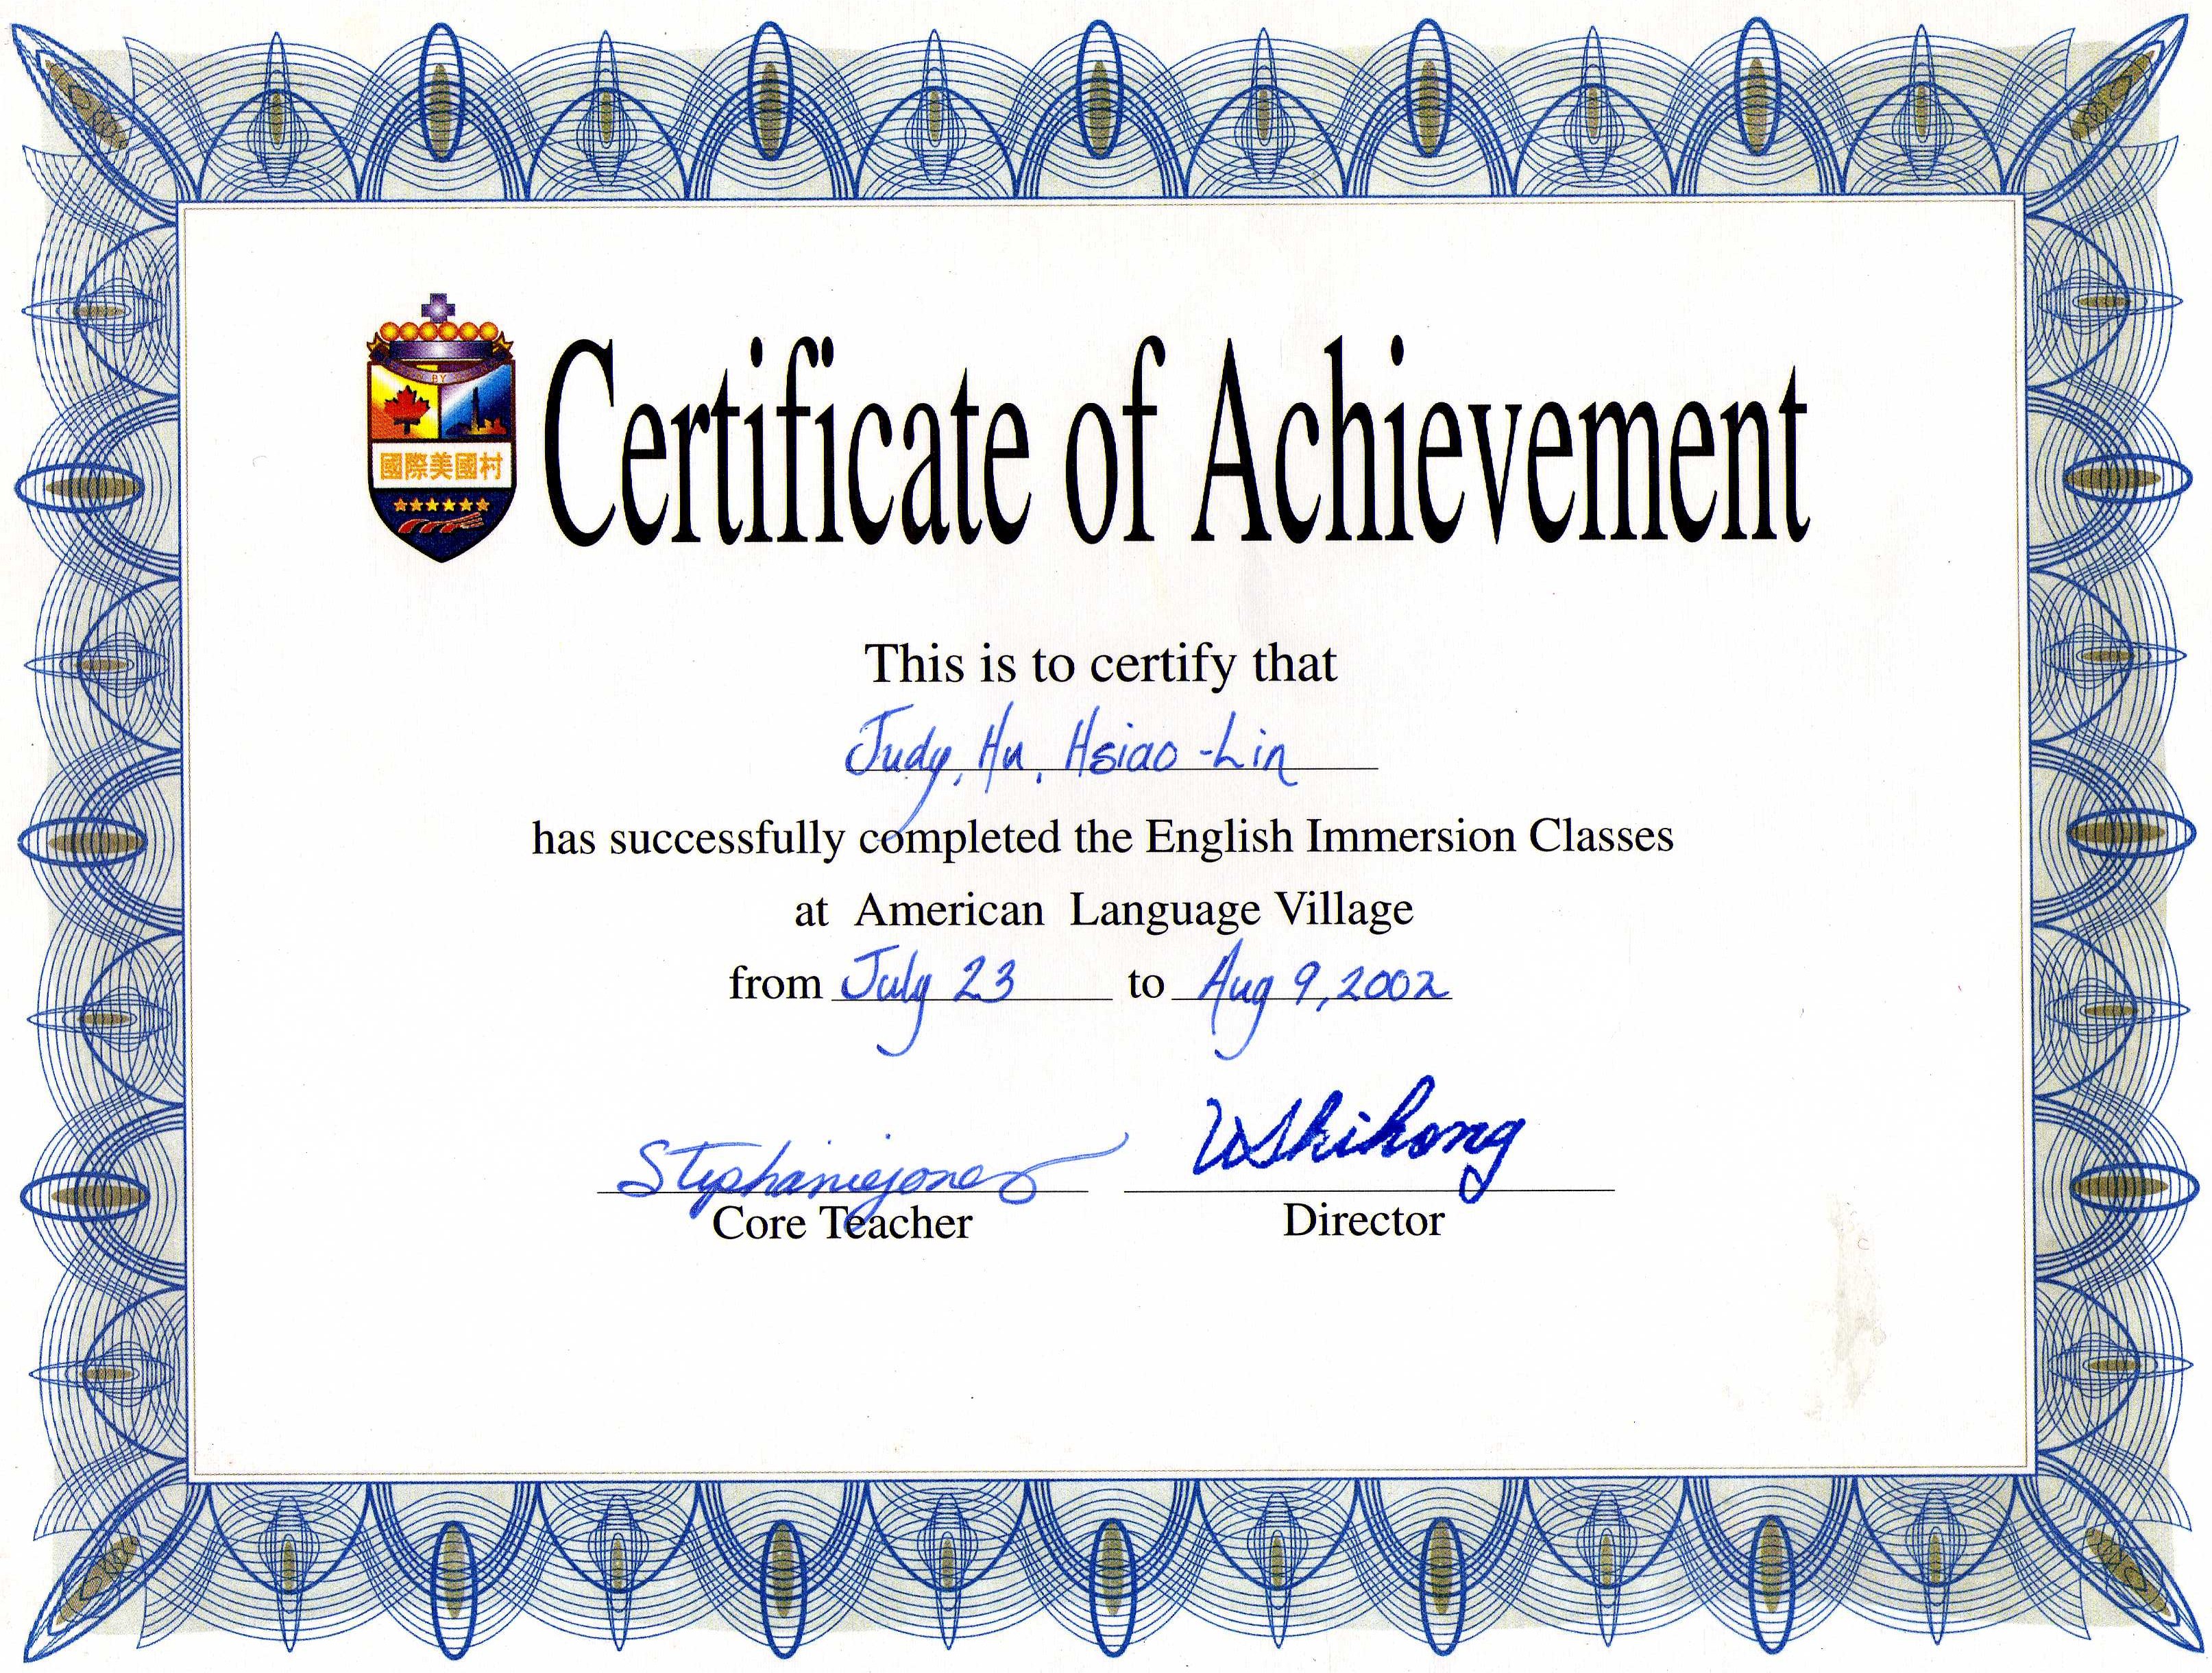 Certificate of Achievement English Immersion Classes